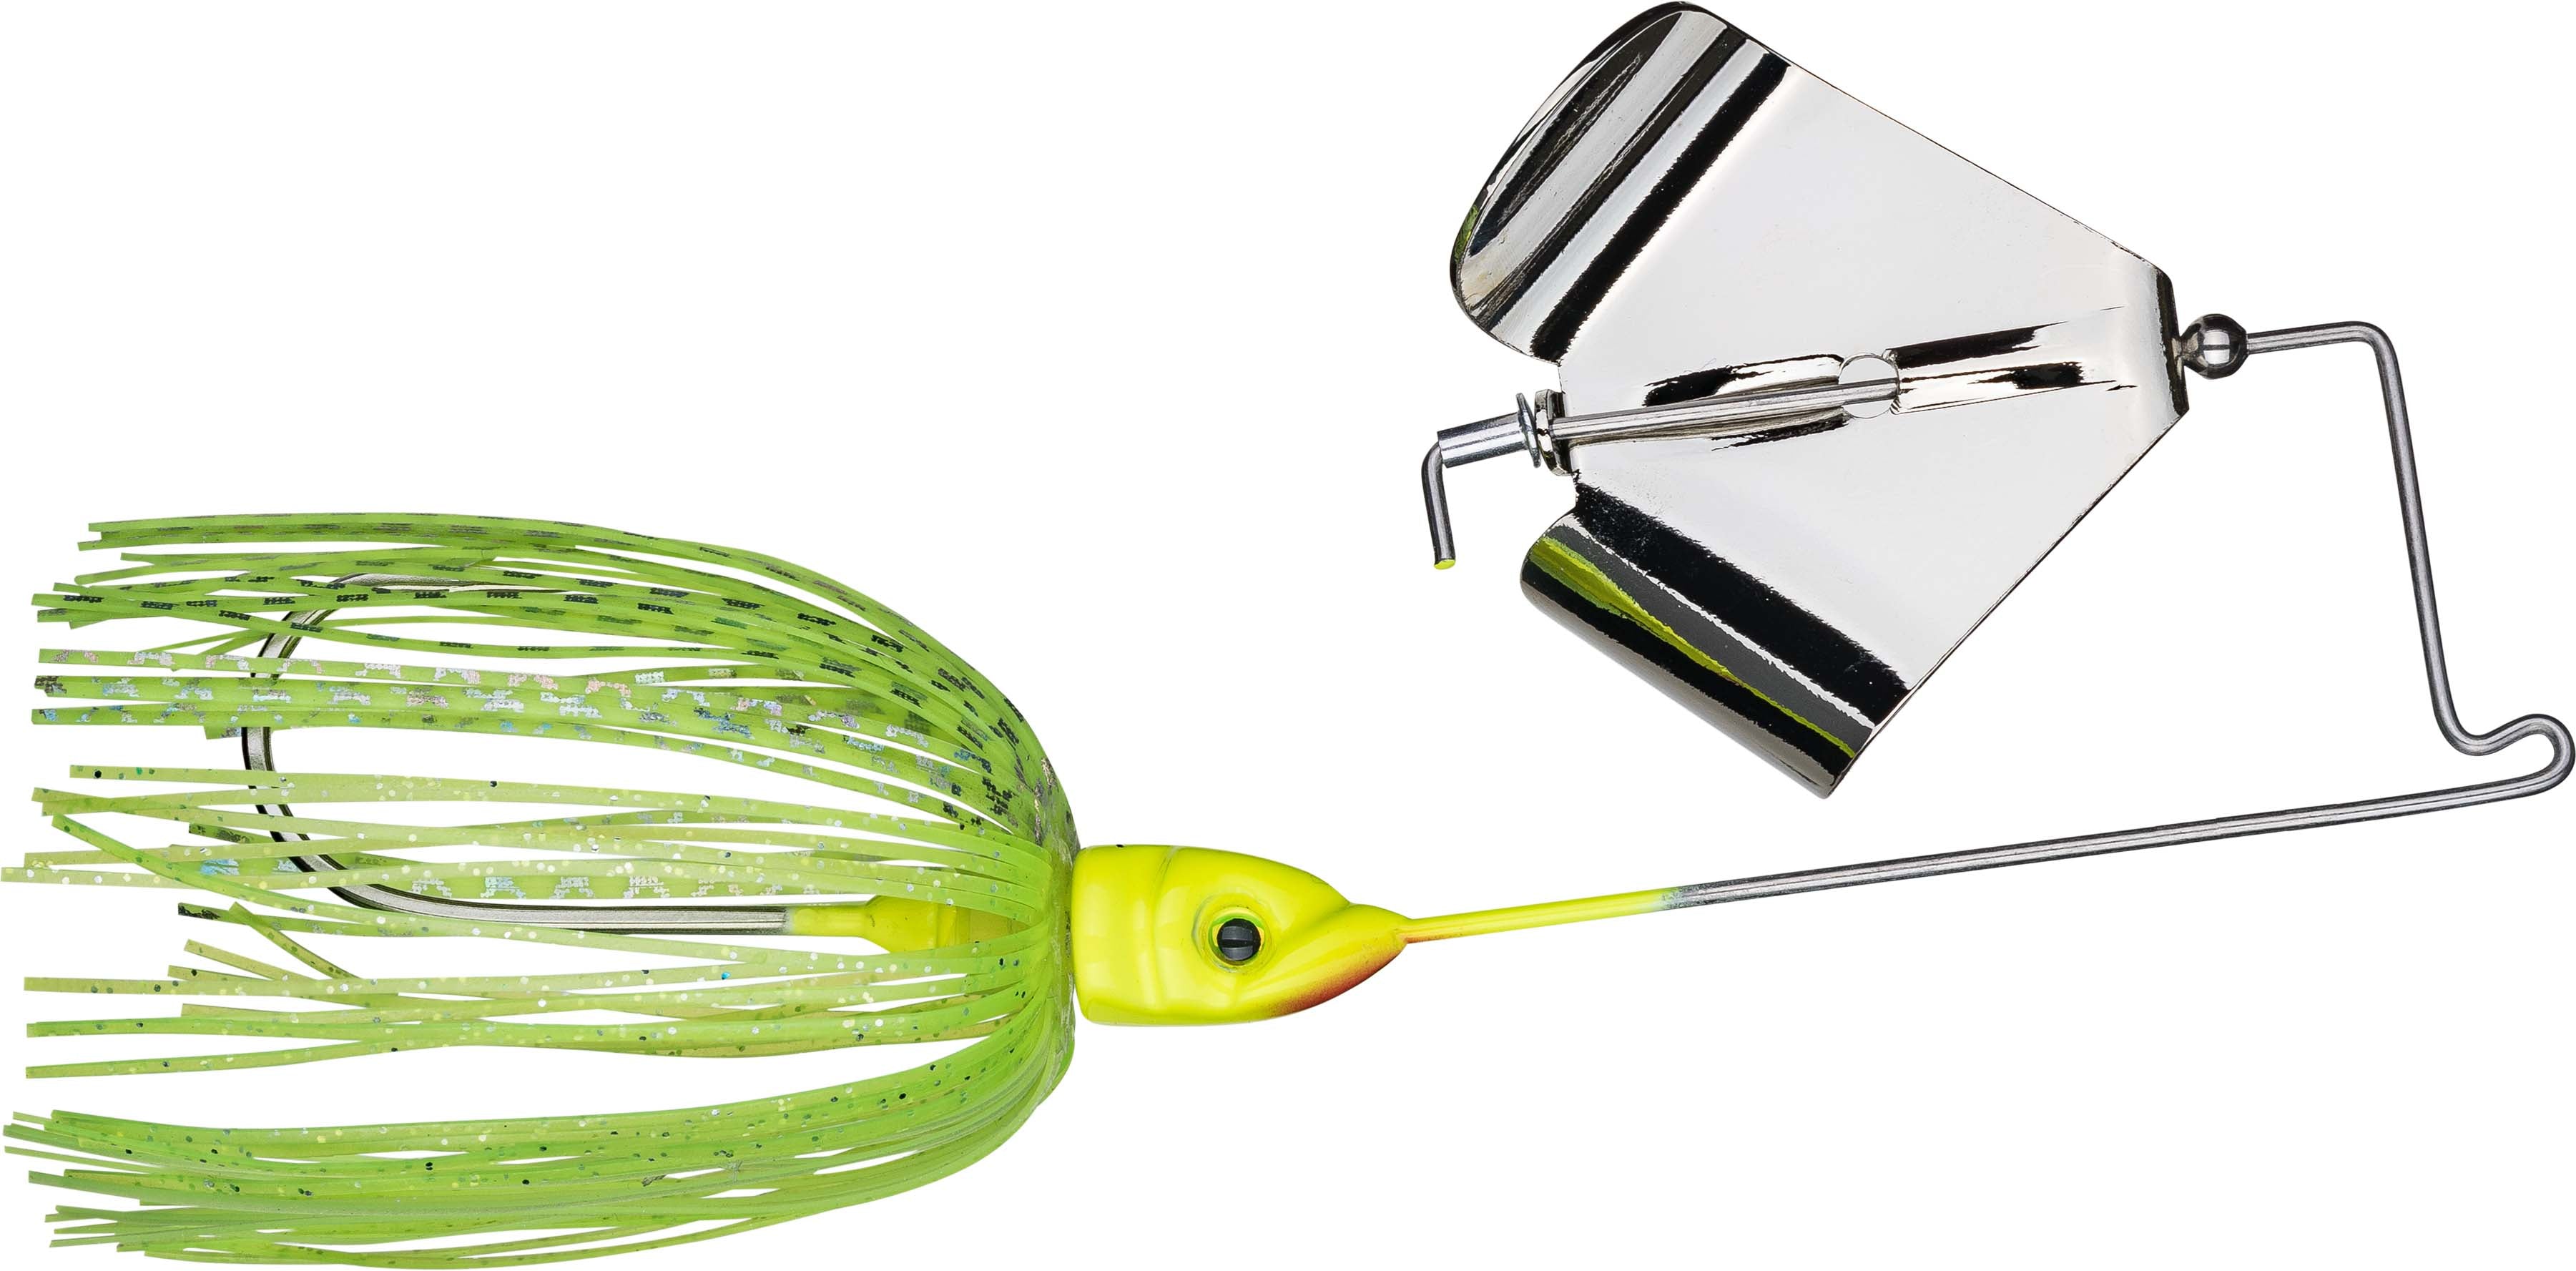 Spinnerbaits & Buzzbaits – Lures and Lead